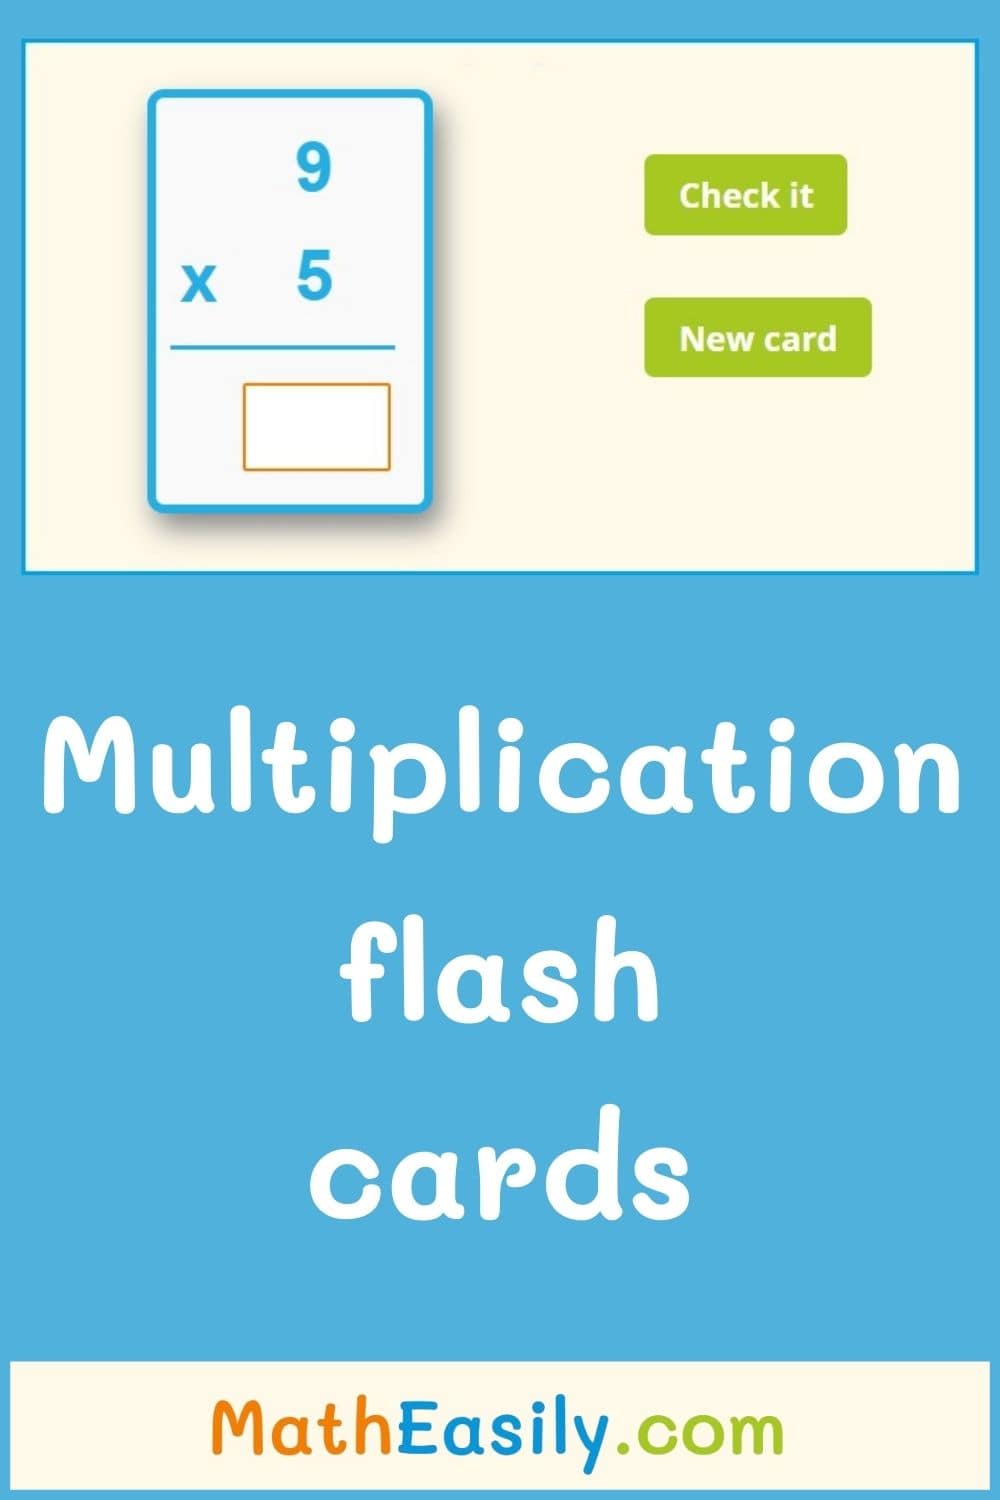 free multiplication flash cards online 0-12. Free online multiplication flash cards up to 12. multiplication flashcards games online.
 times table flash cards online. Random multiplication flash cards games. online flash cards multiplication. 
 multiplication flash cards online free.